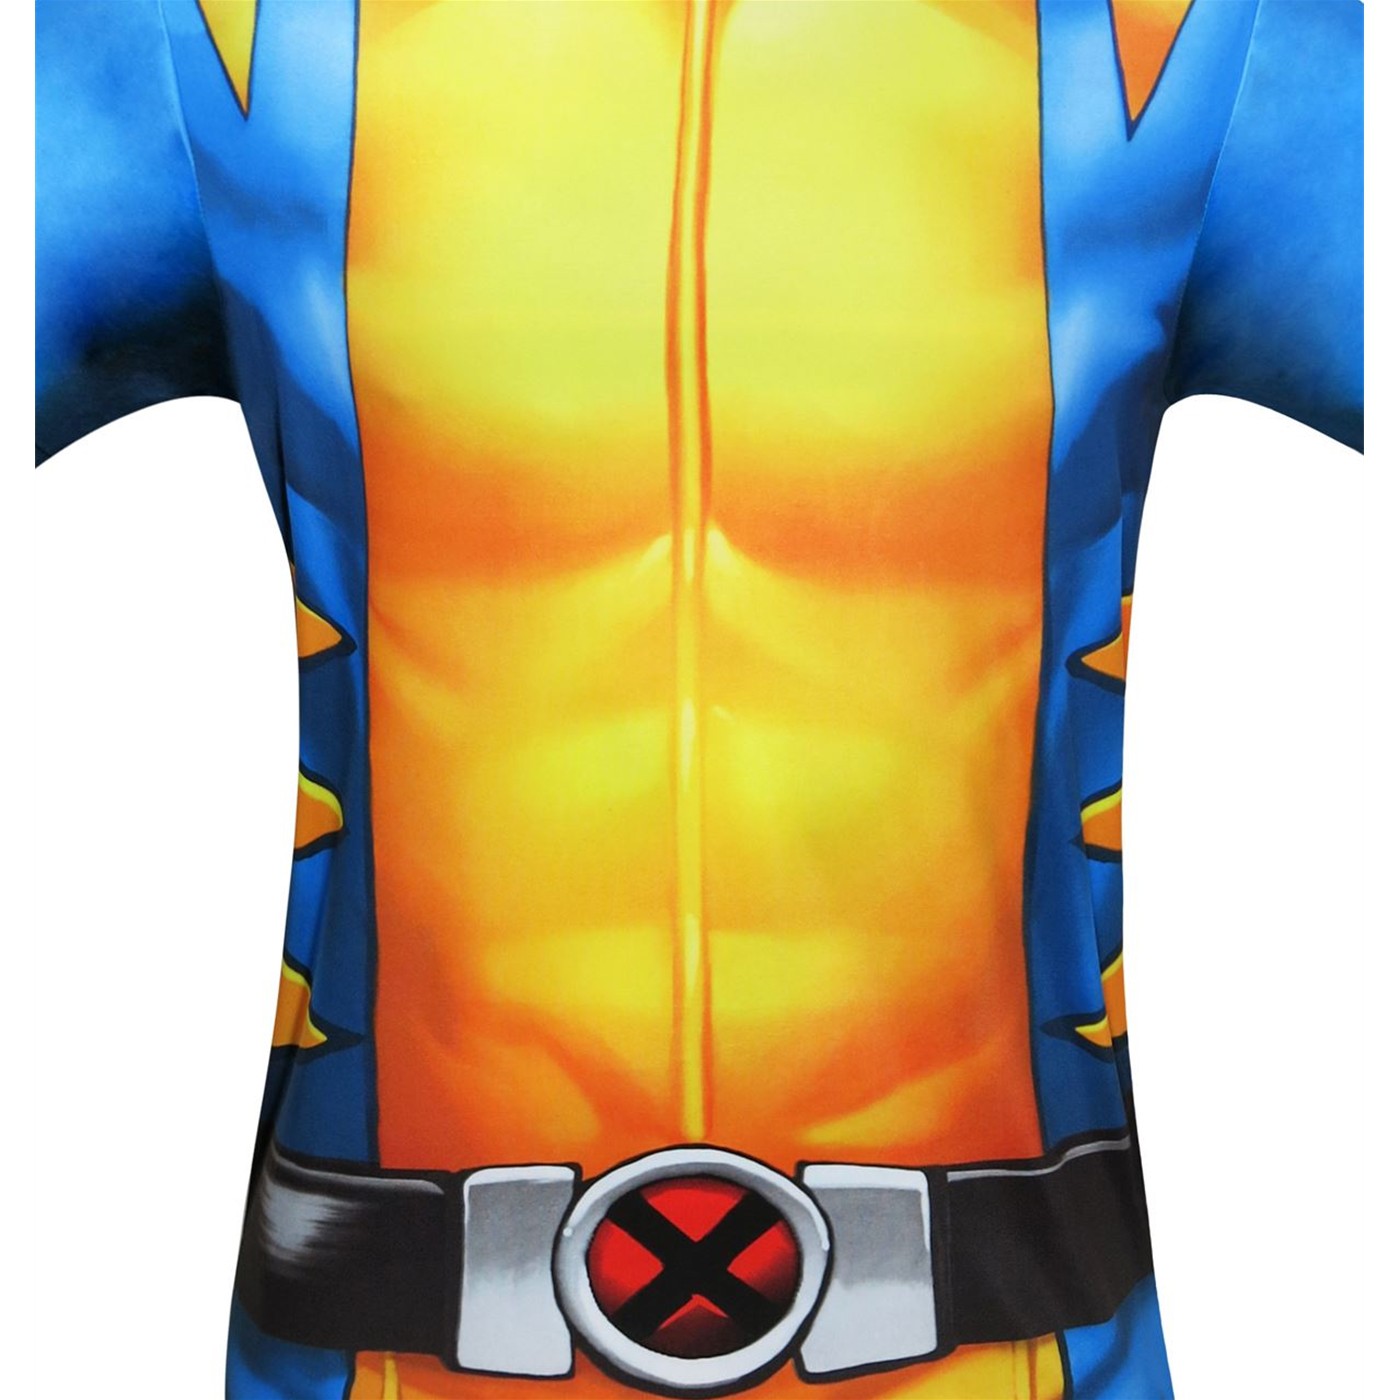 Wolverine Sublimated Costume Fitness T-Shirt